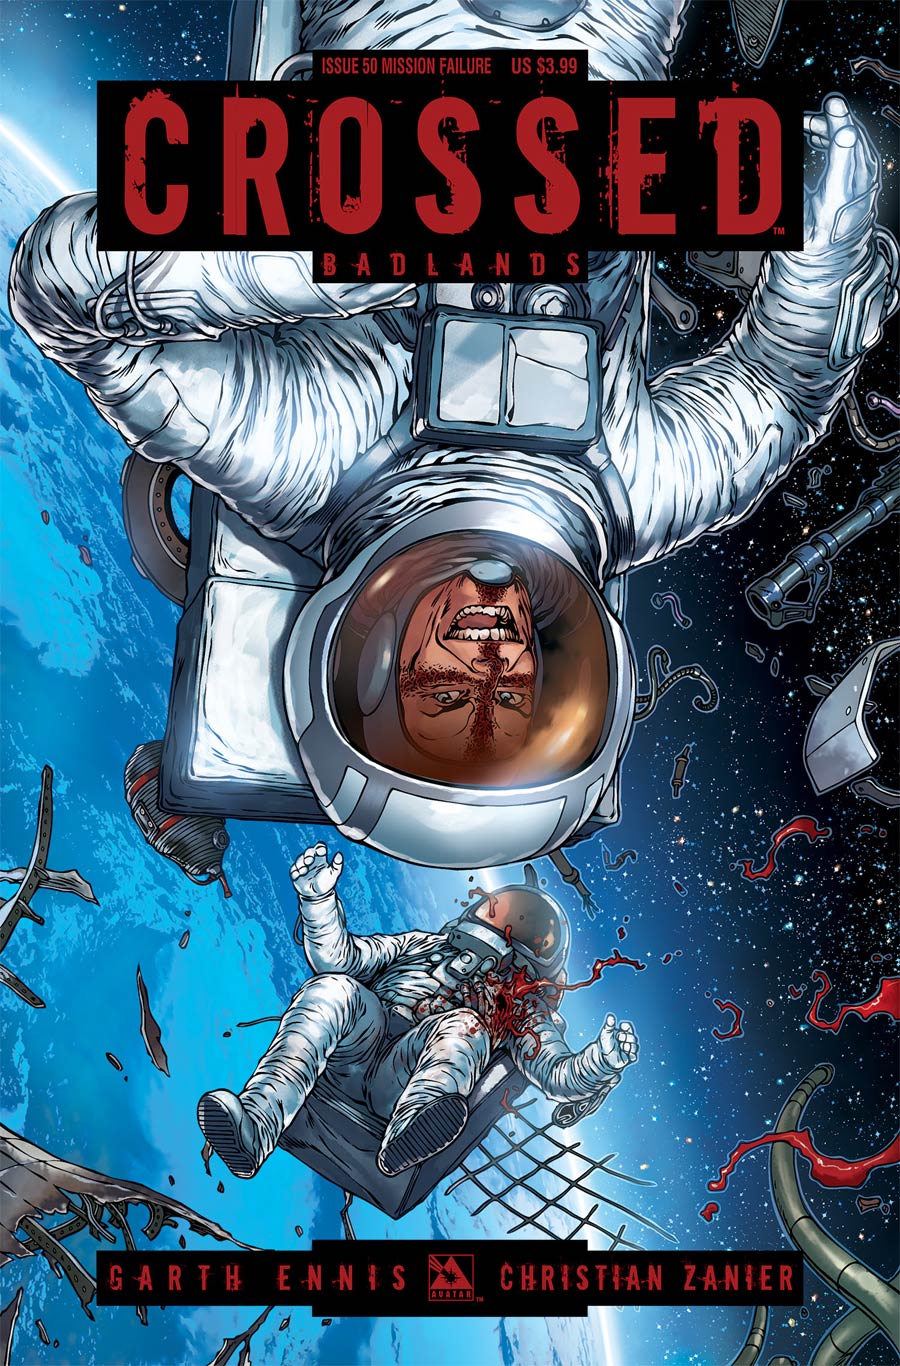 Crossed Badlands #50 Cover F Mission Failure Cover